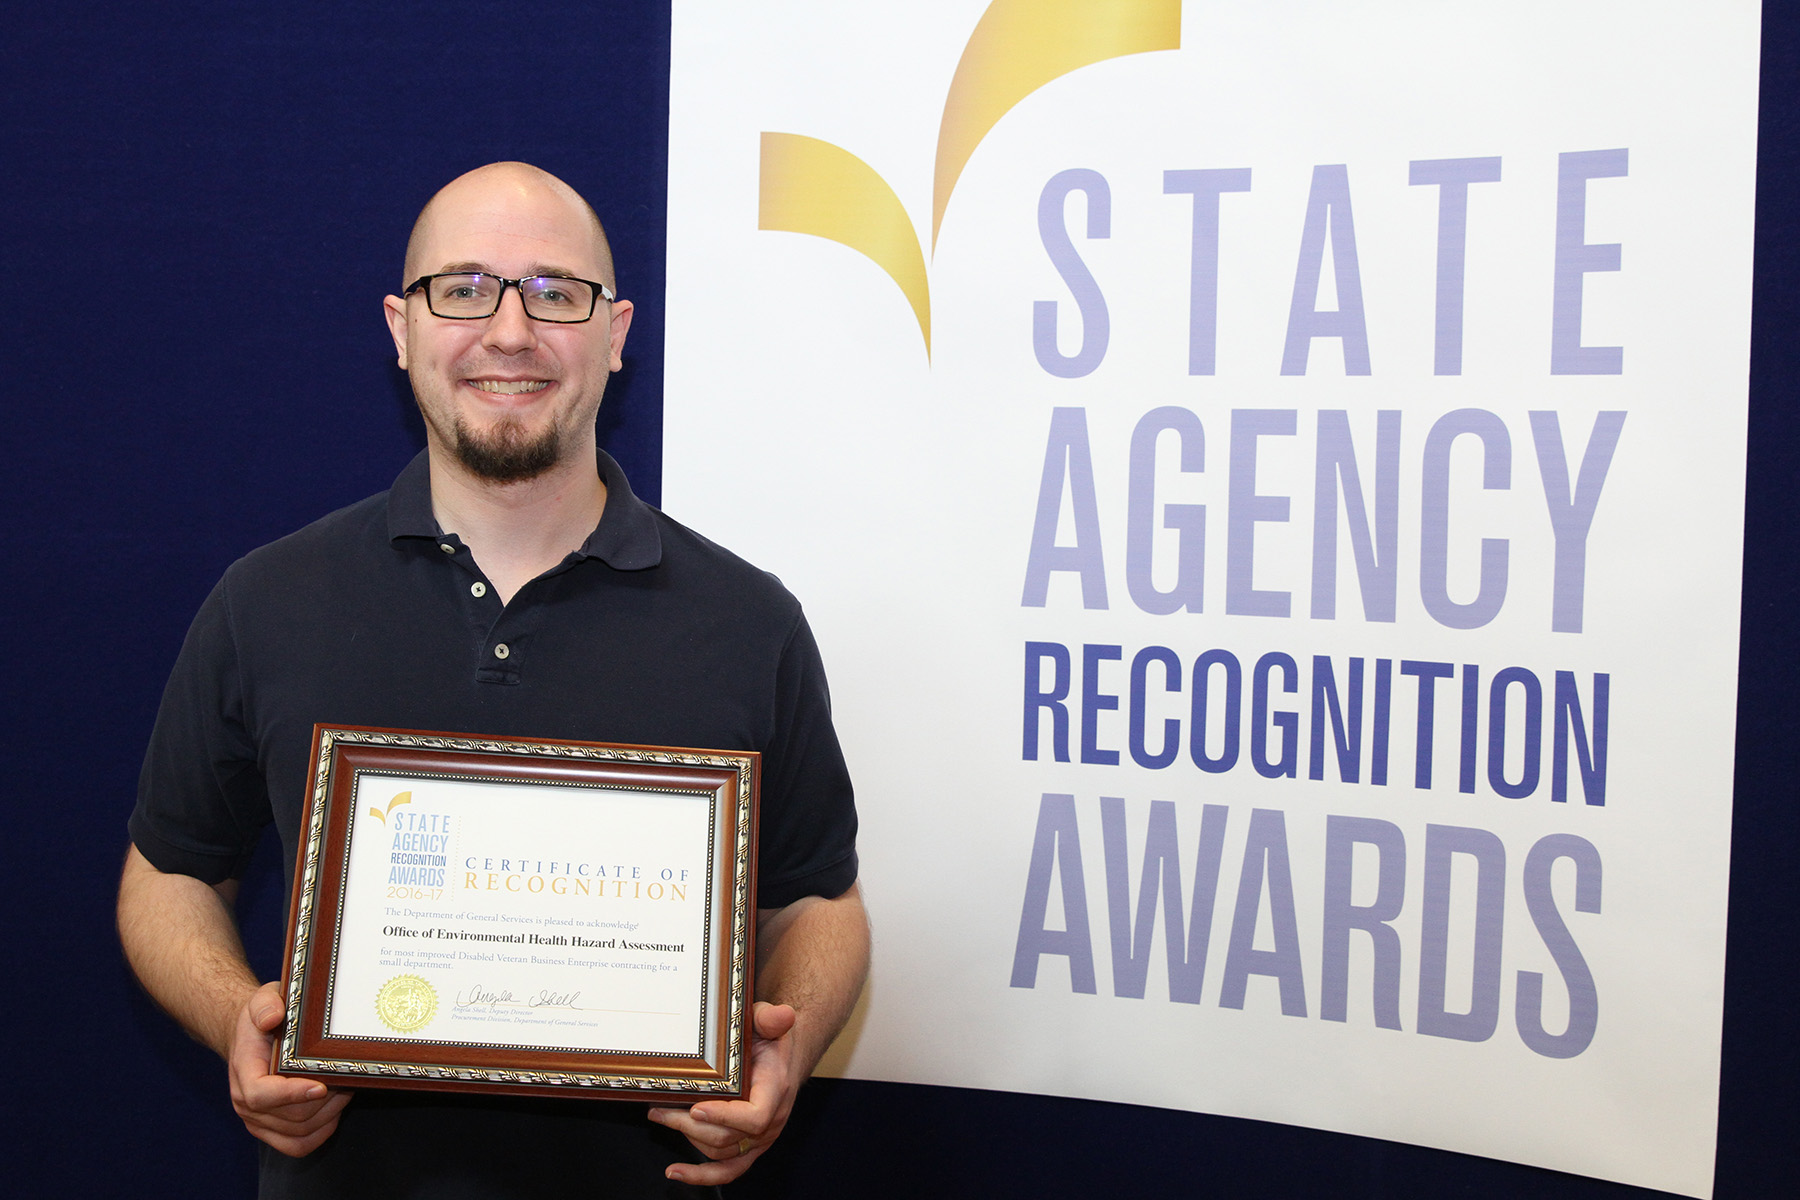 Anthony Picciano accepts the most improved DVBE participation for the Office of Environmental Health Hazard Assessment for the small agency category